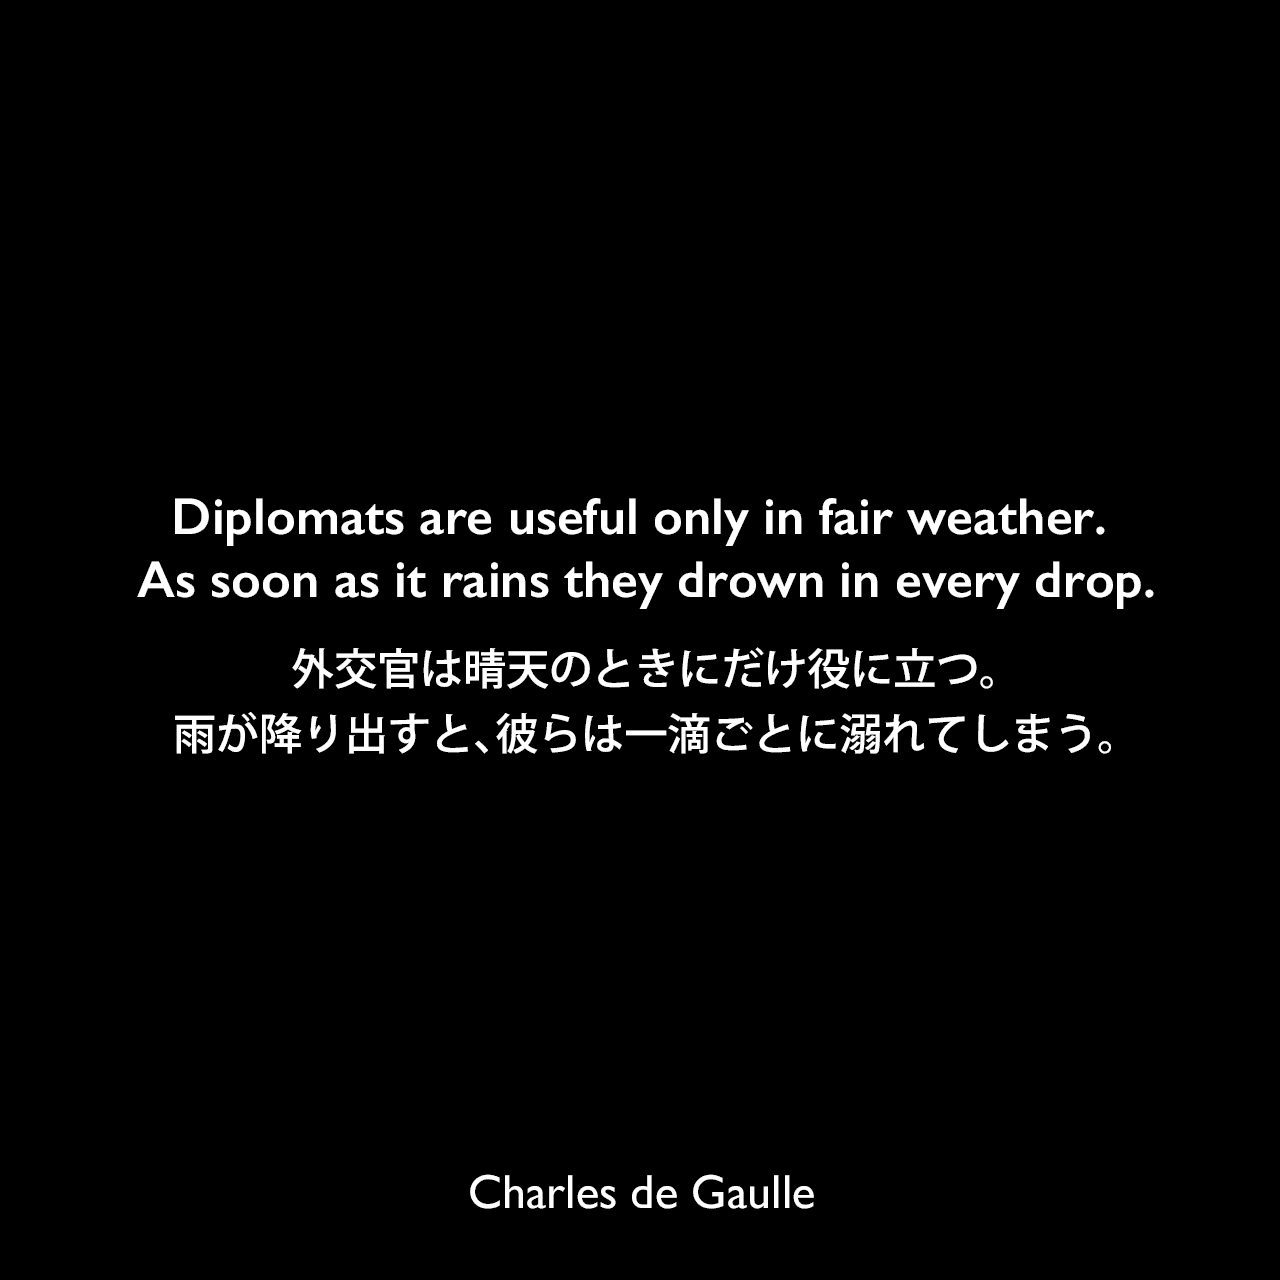 Diplomats are useful only in fair weather. As soon as it rains they drown in every drop.外交官は晴天のときにだけ役に立つ。雨が降り出すと、彼らは一滴ごとに溺れてしまう。Charles de Gaulle